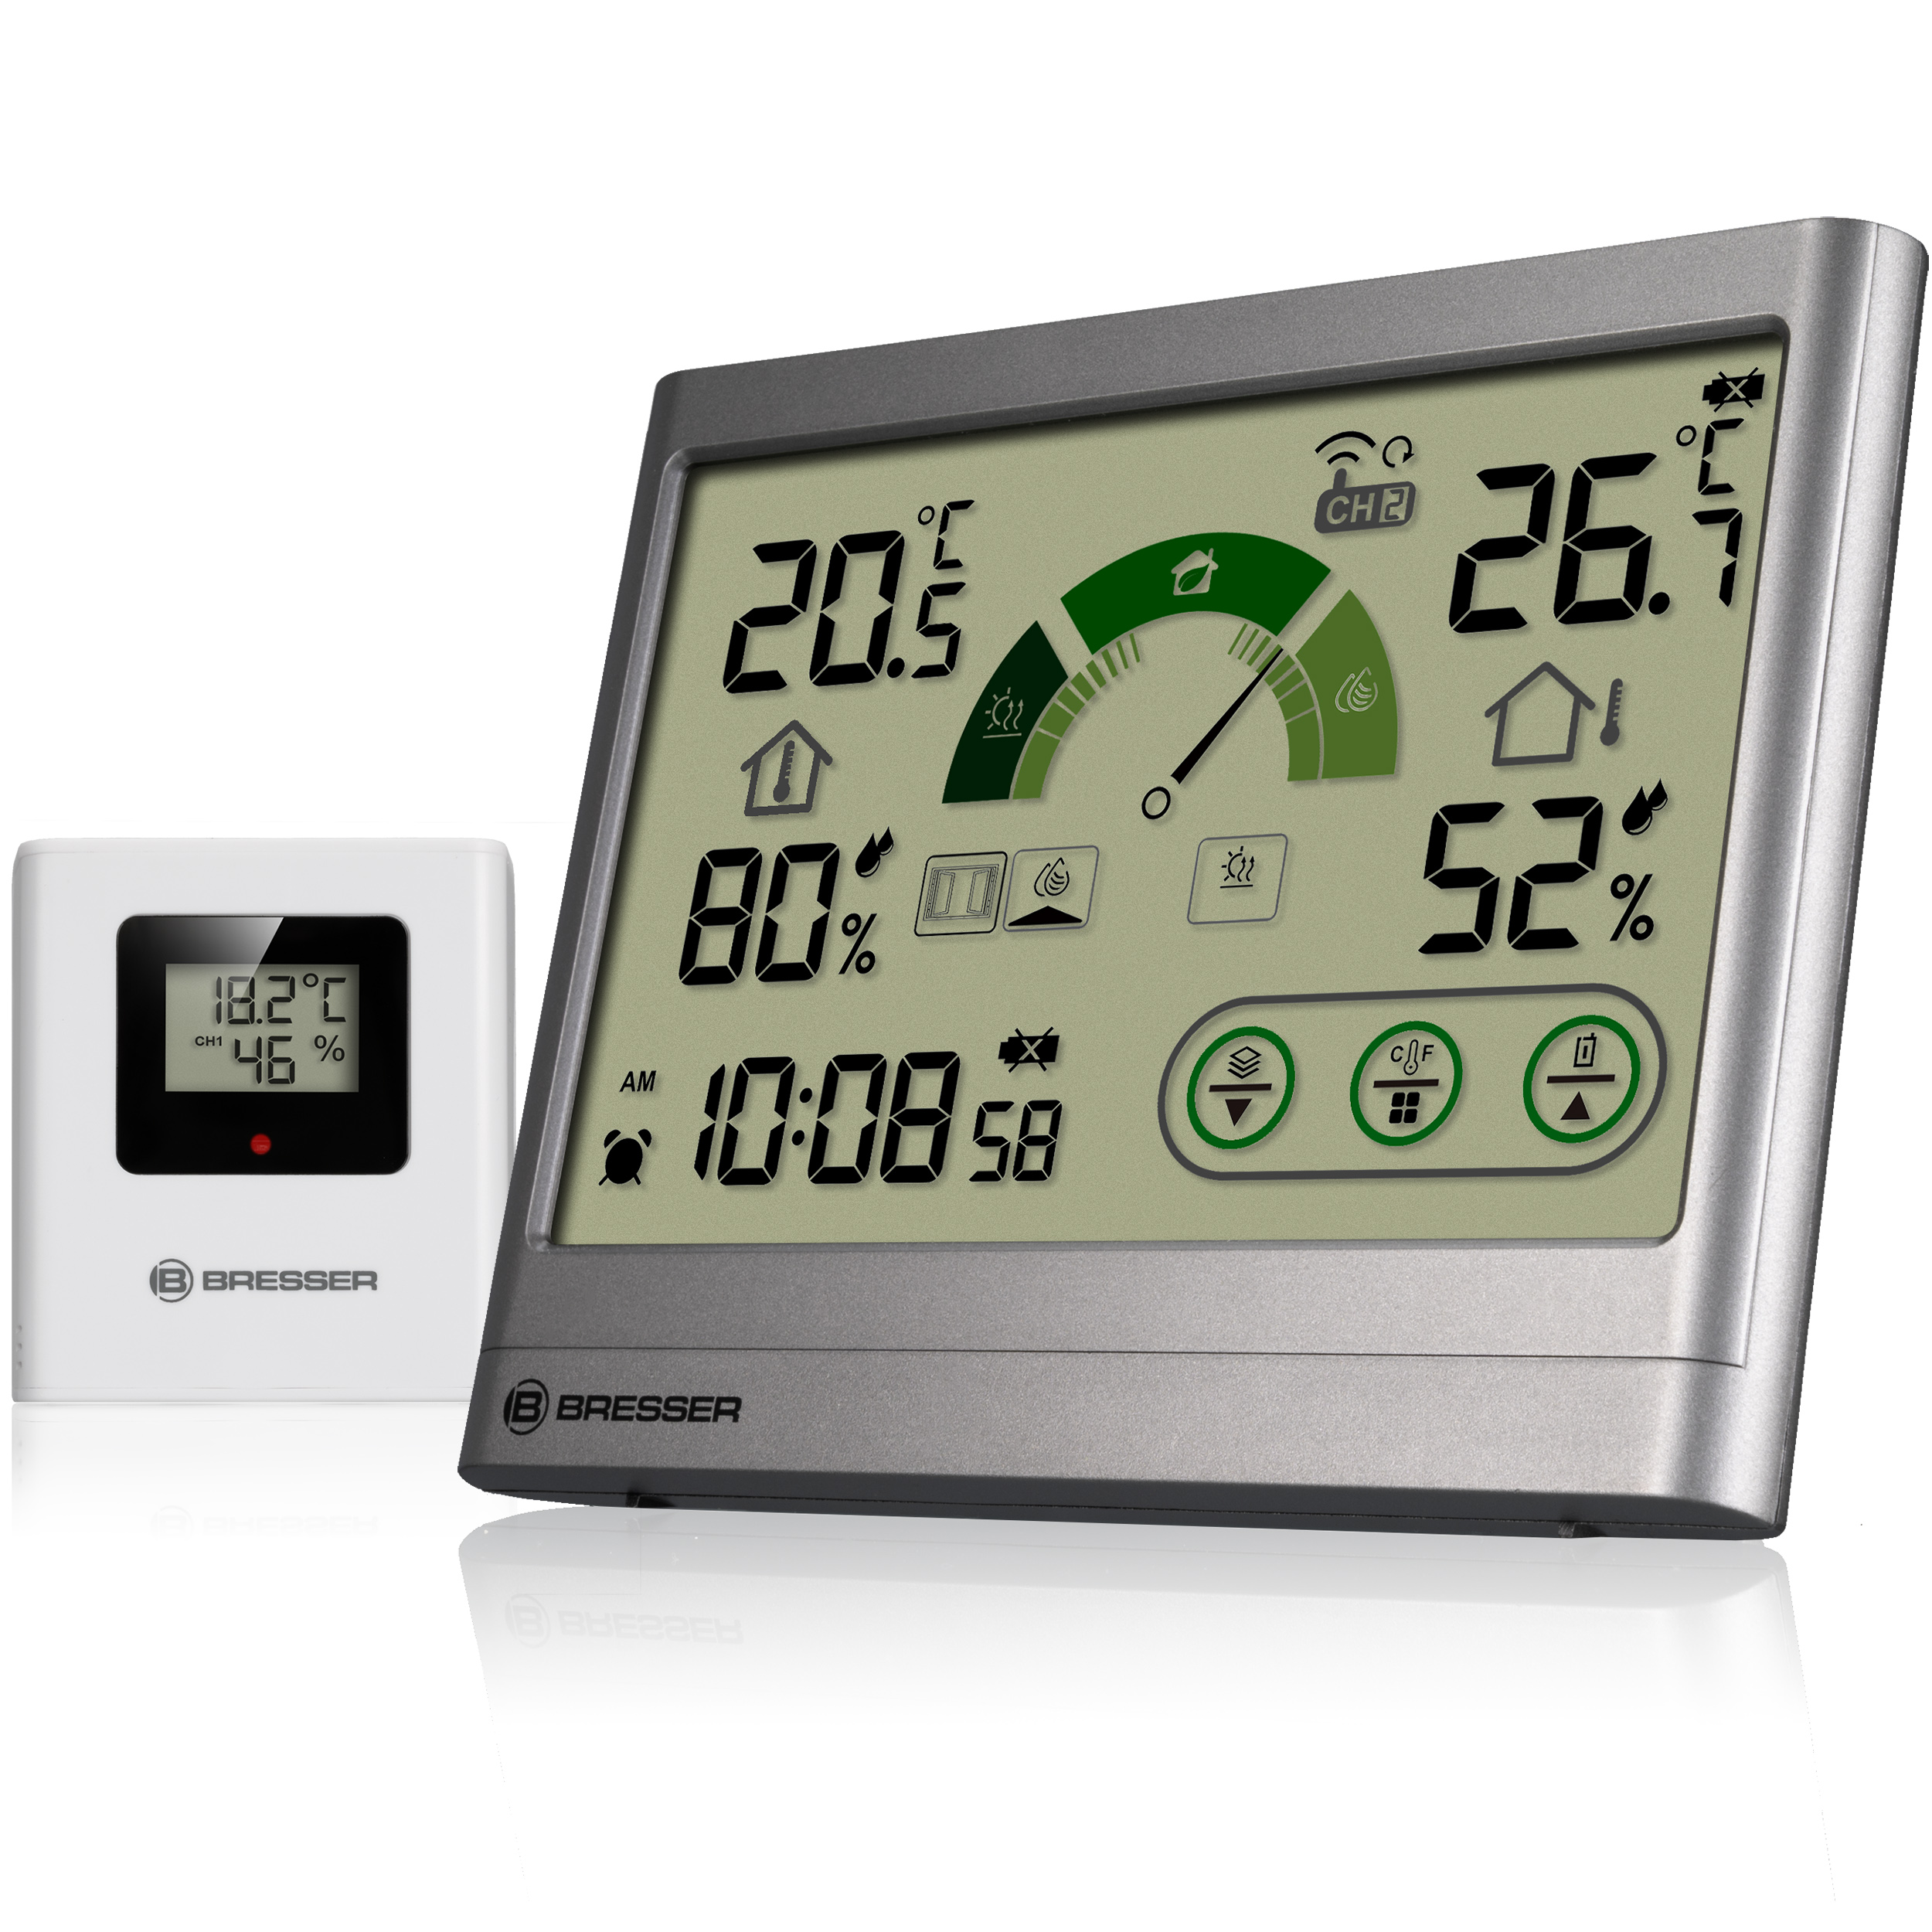 BRESSER Thermo-Hygrometer with Ventilation Recommendation VentAir H